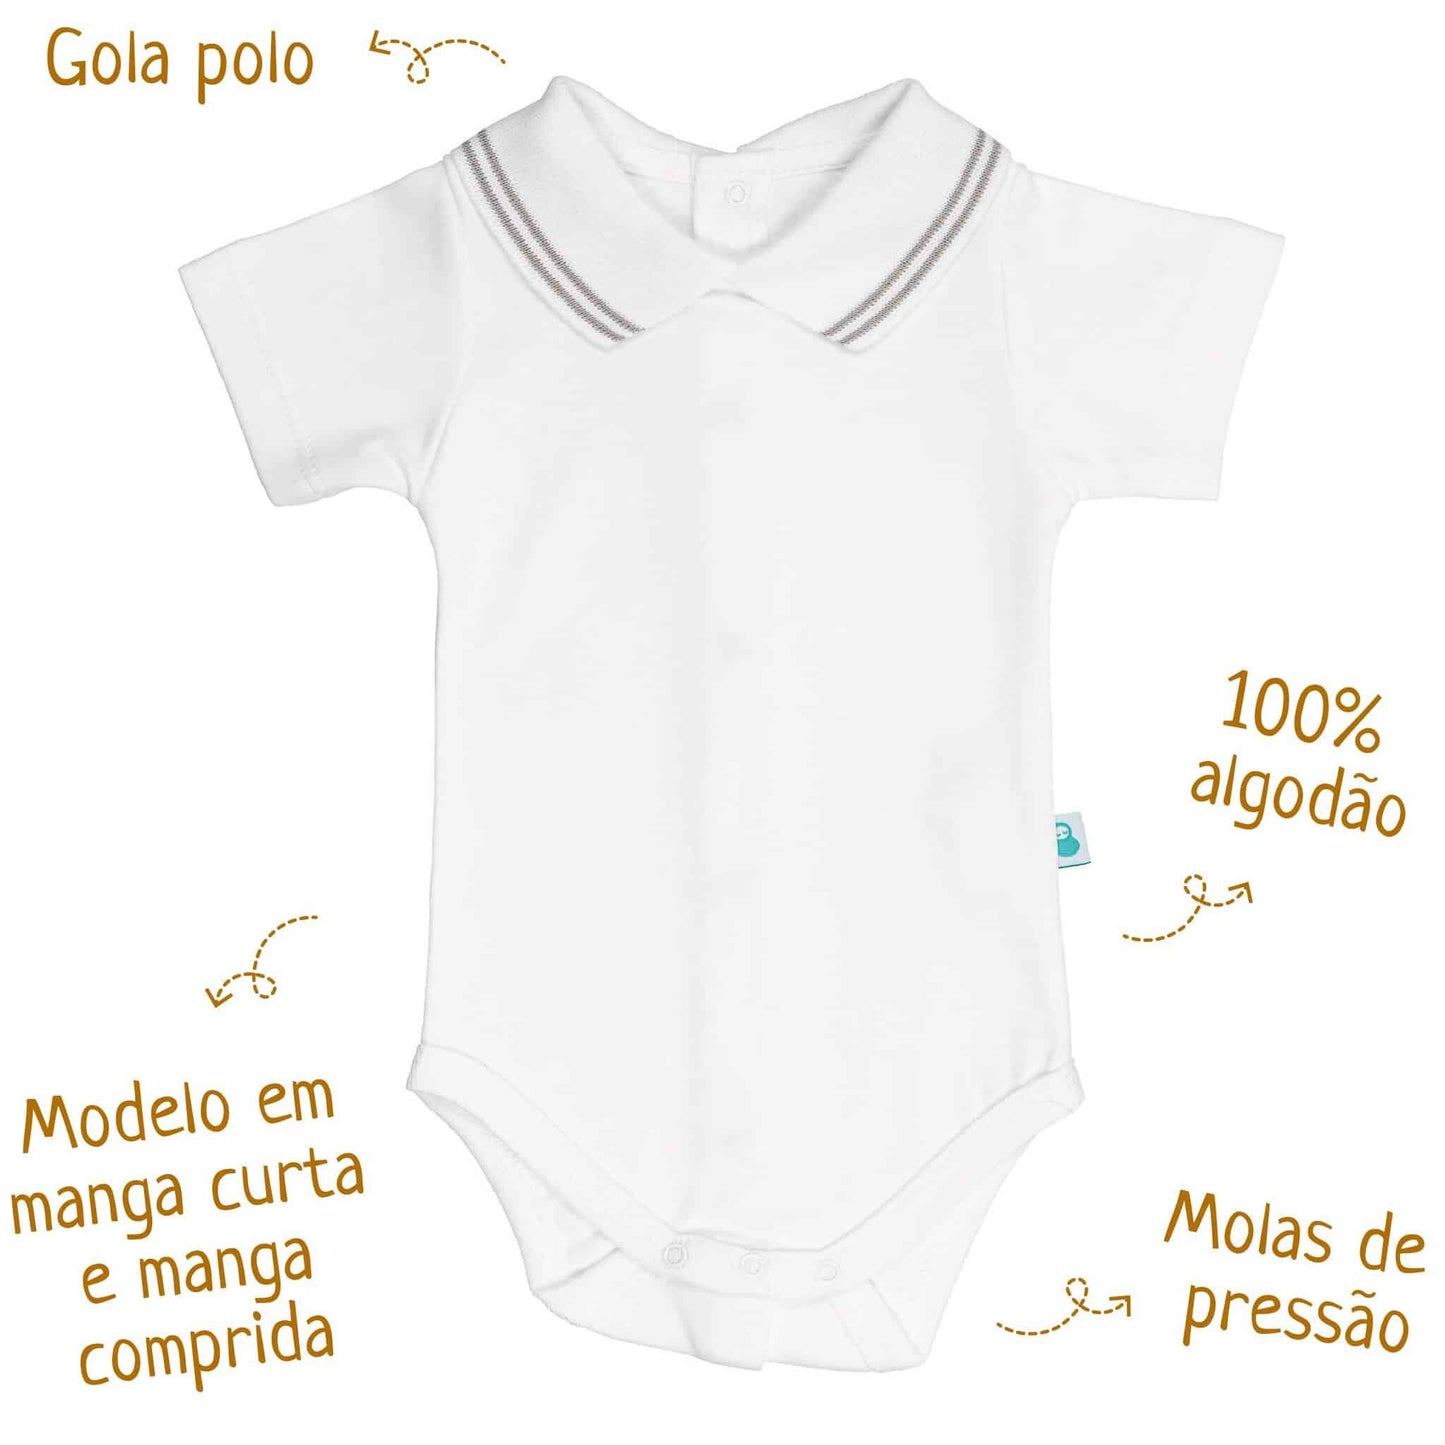 Cotton Baby Bodysuit Onesie with Polo-Style Collar: 1-3M / Short Sleeve / Light Blue